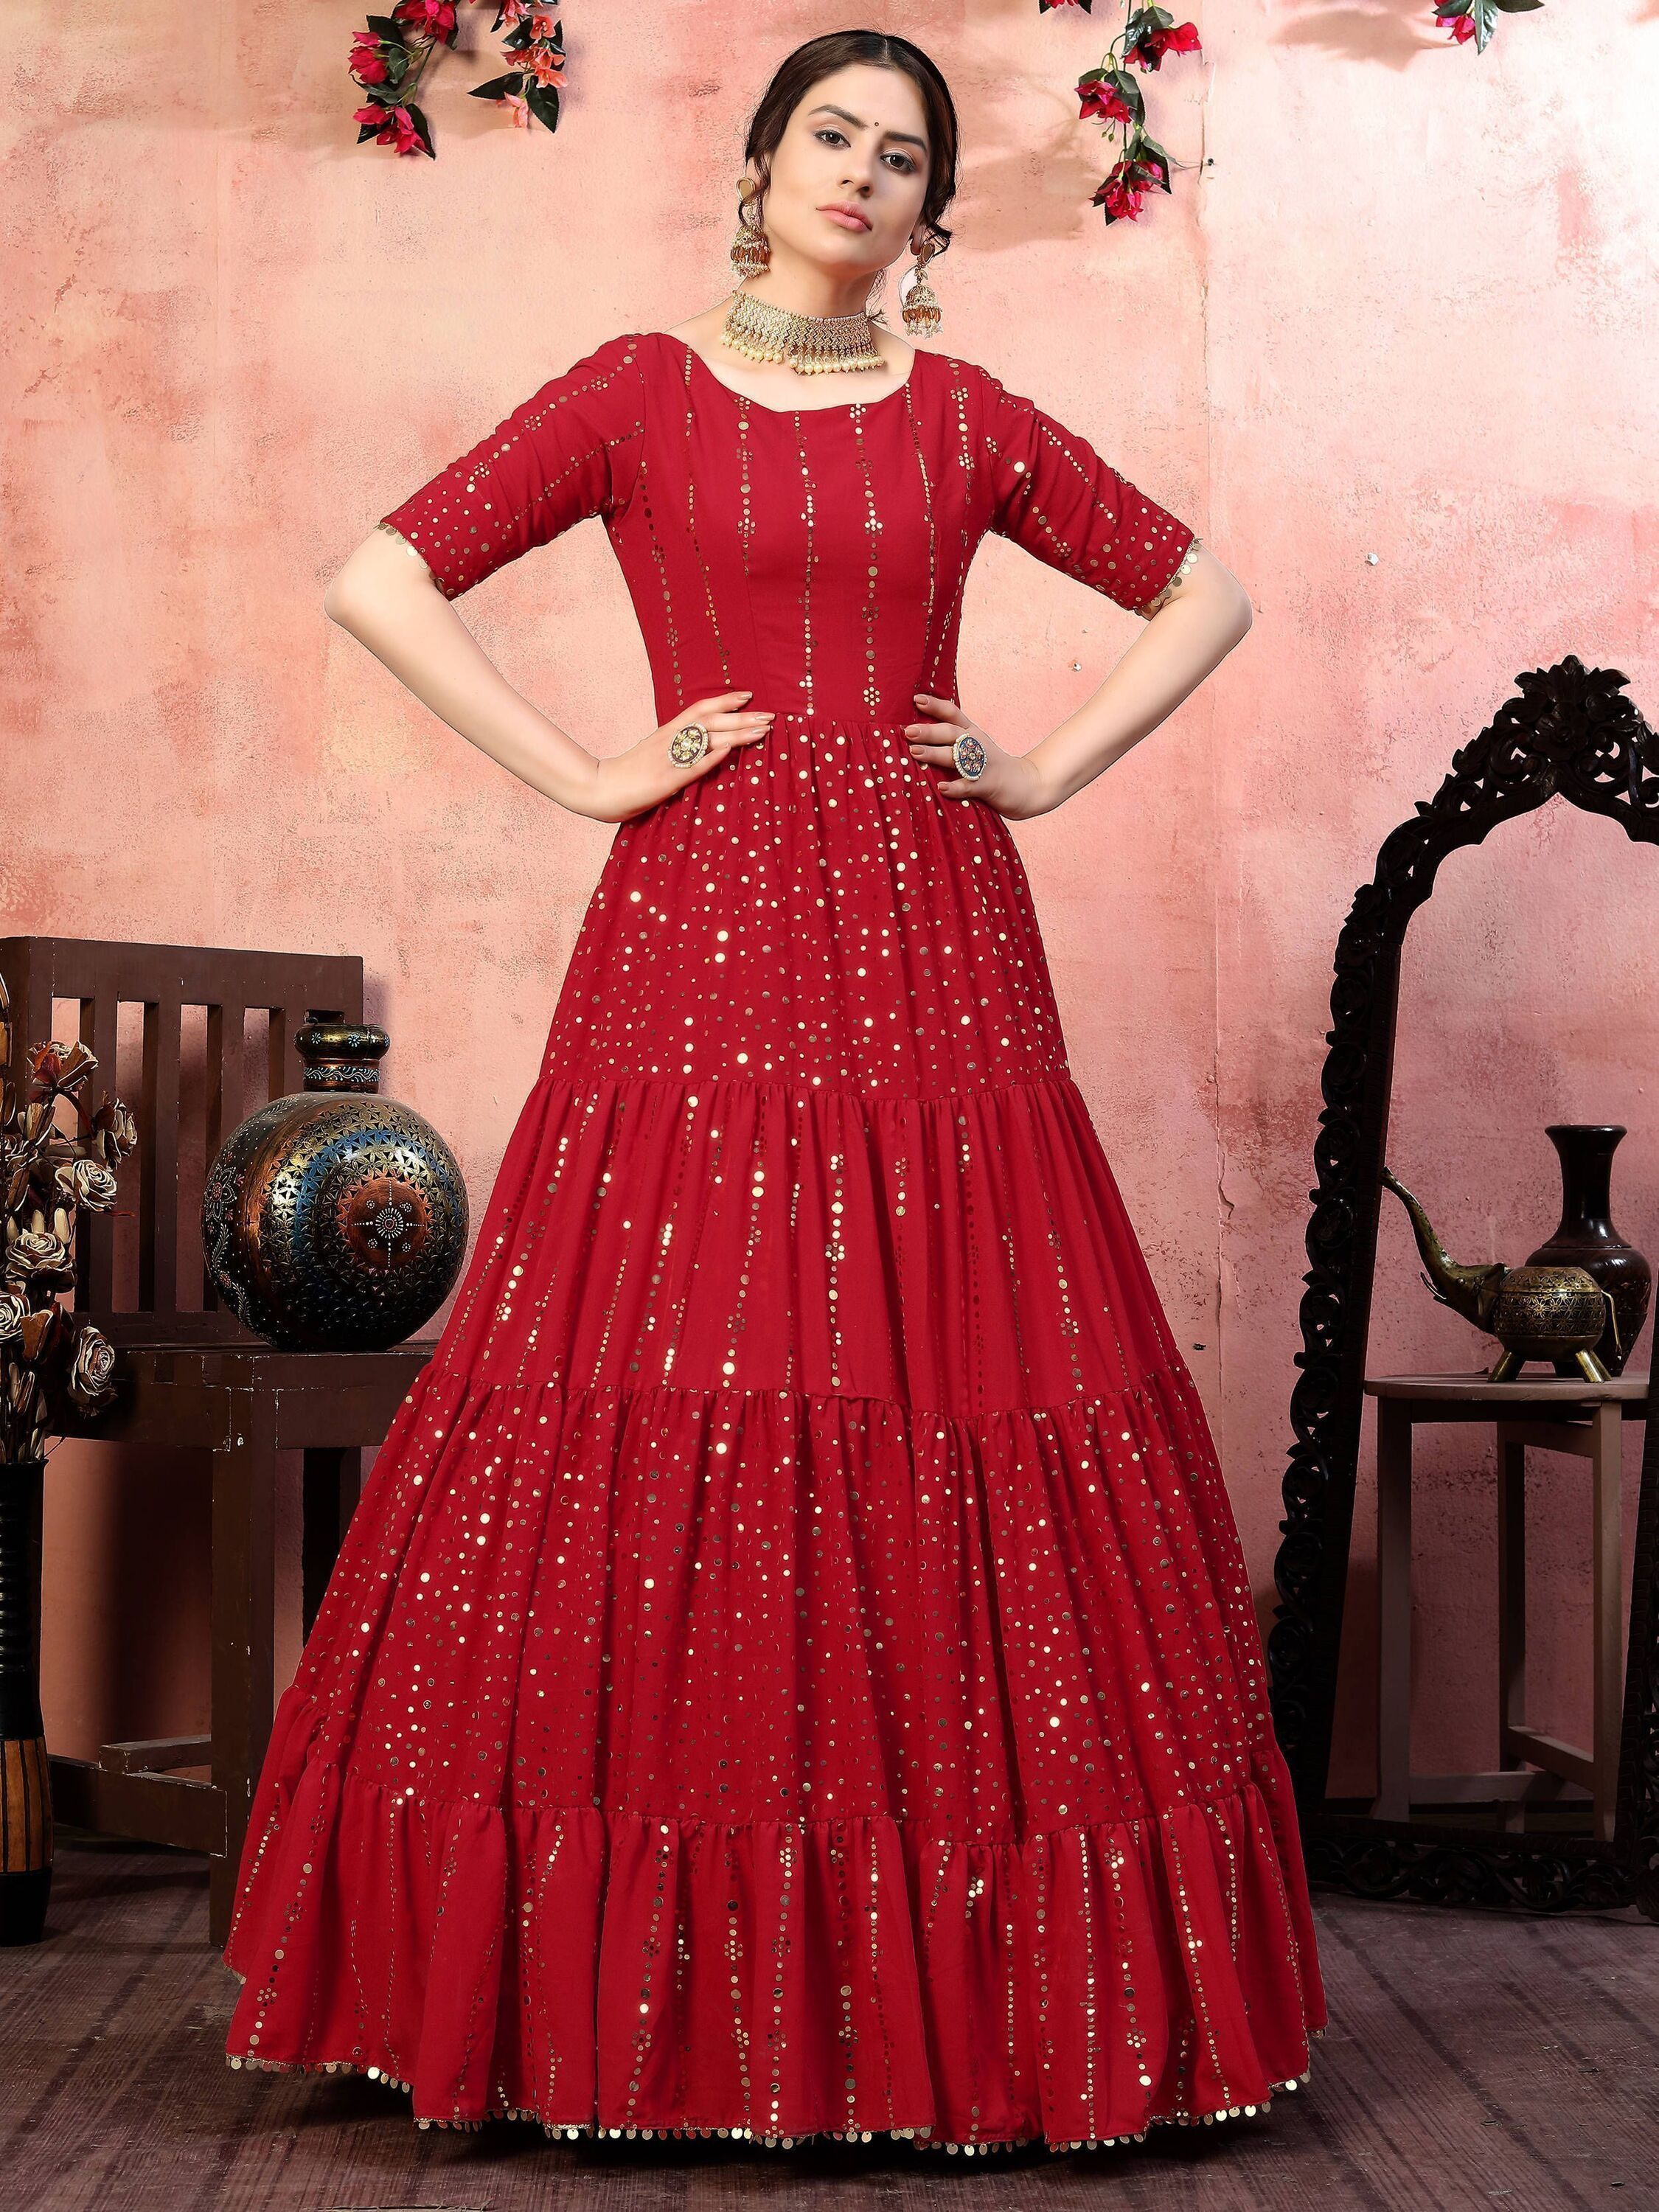 Acquire Red Party Wear Anarkali Gown | Red Sequins Georgette Anarkali Gown  Online at Low Price | EthnicPlus for ₹2149